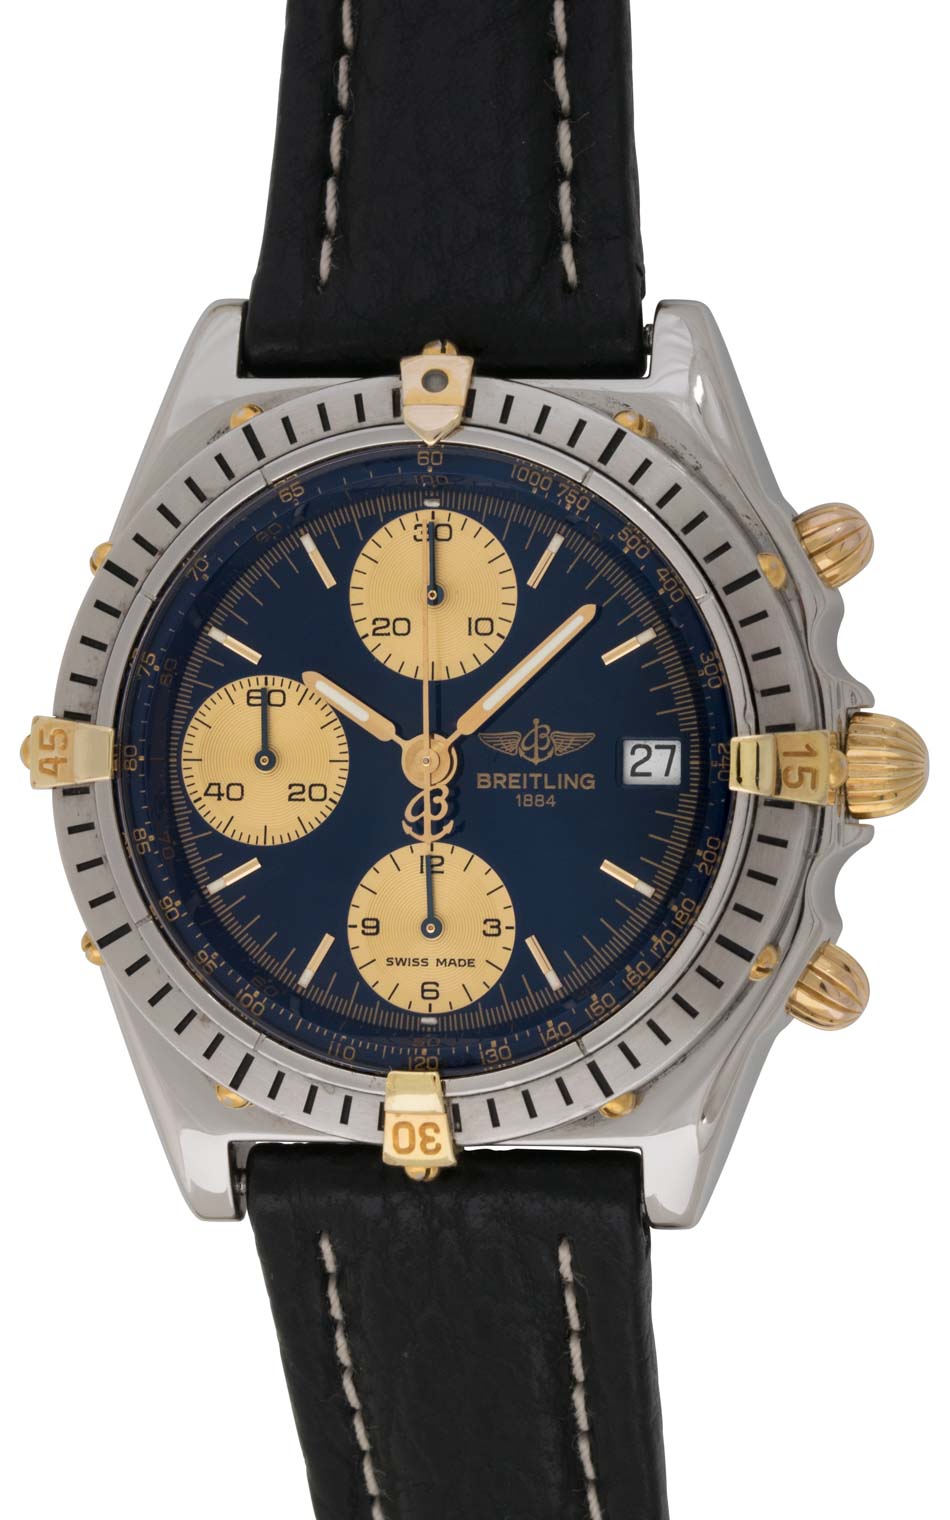 Breitling - Chronomat : B13048 : SOLD OUT : blue / gold dial on black ...